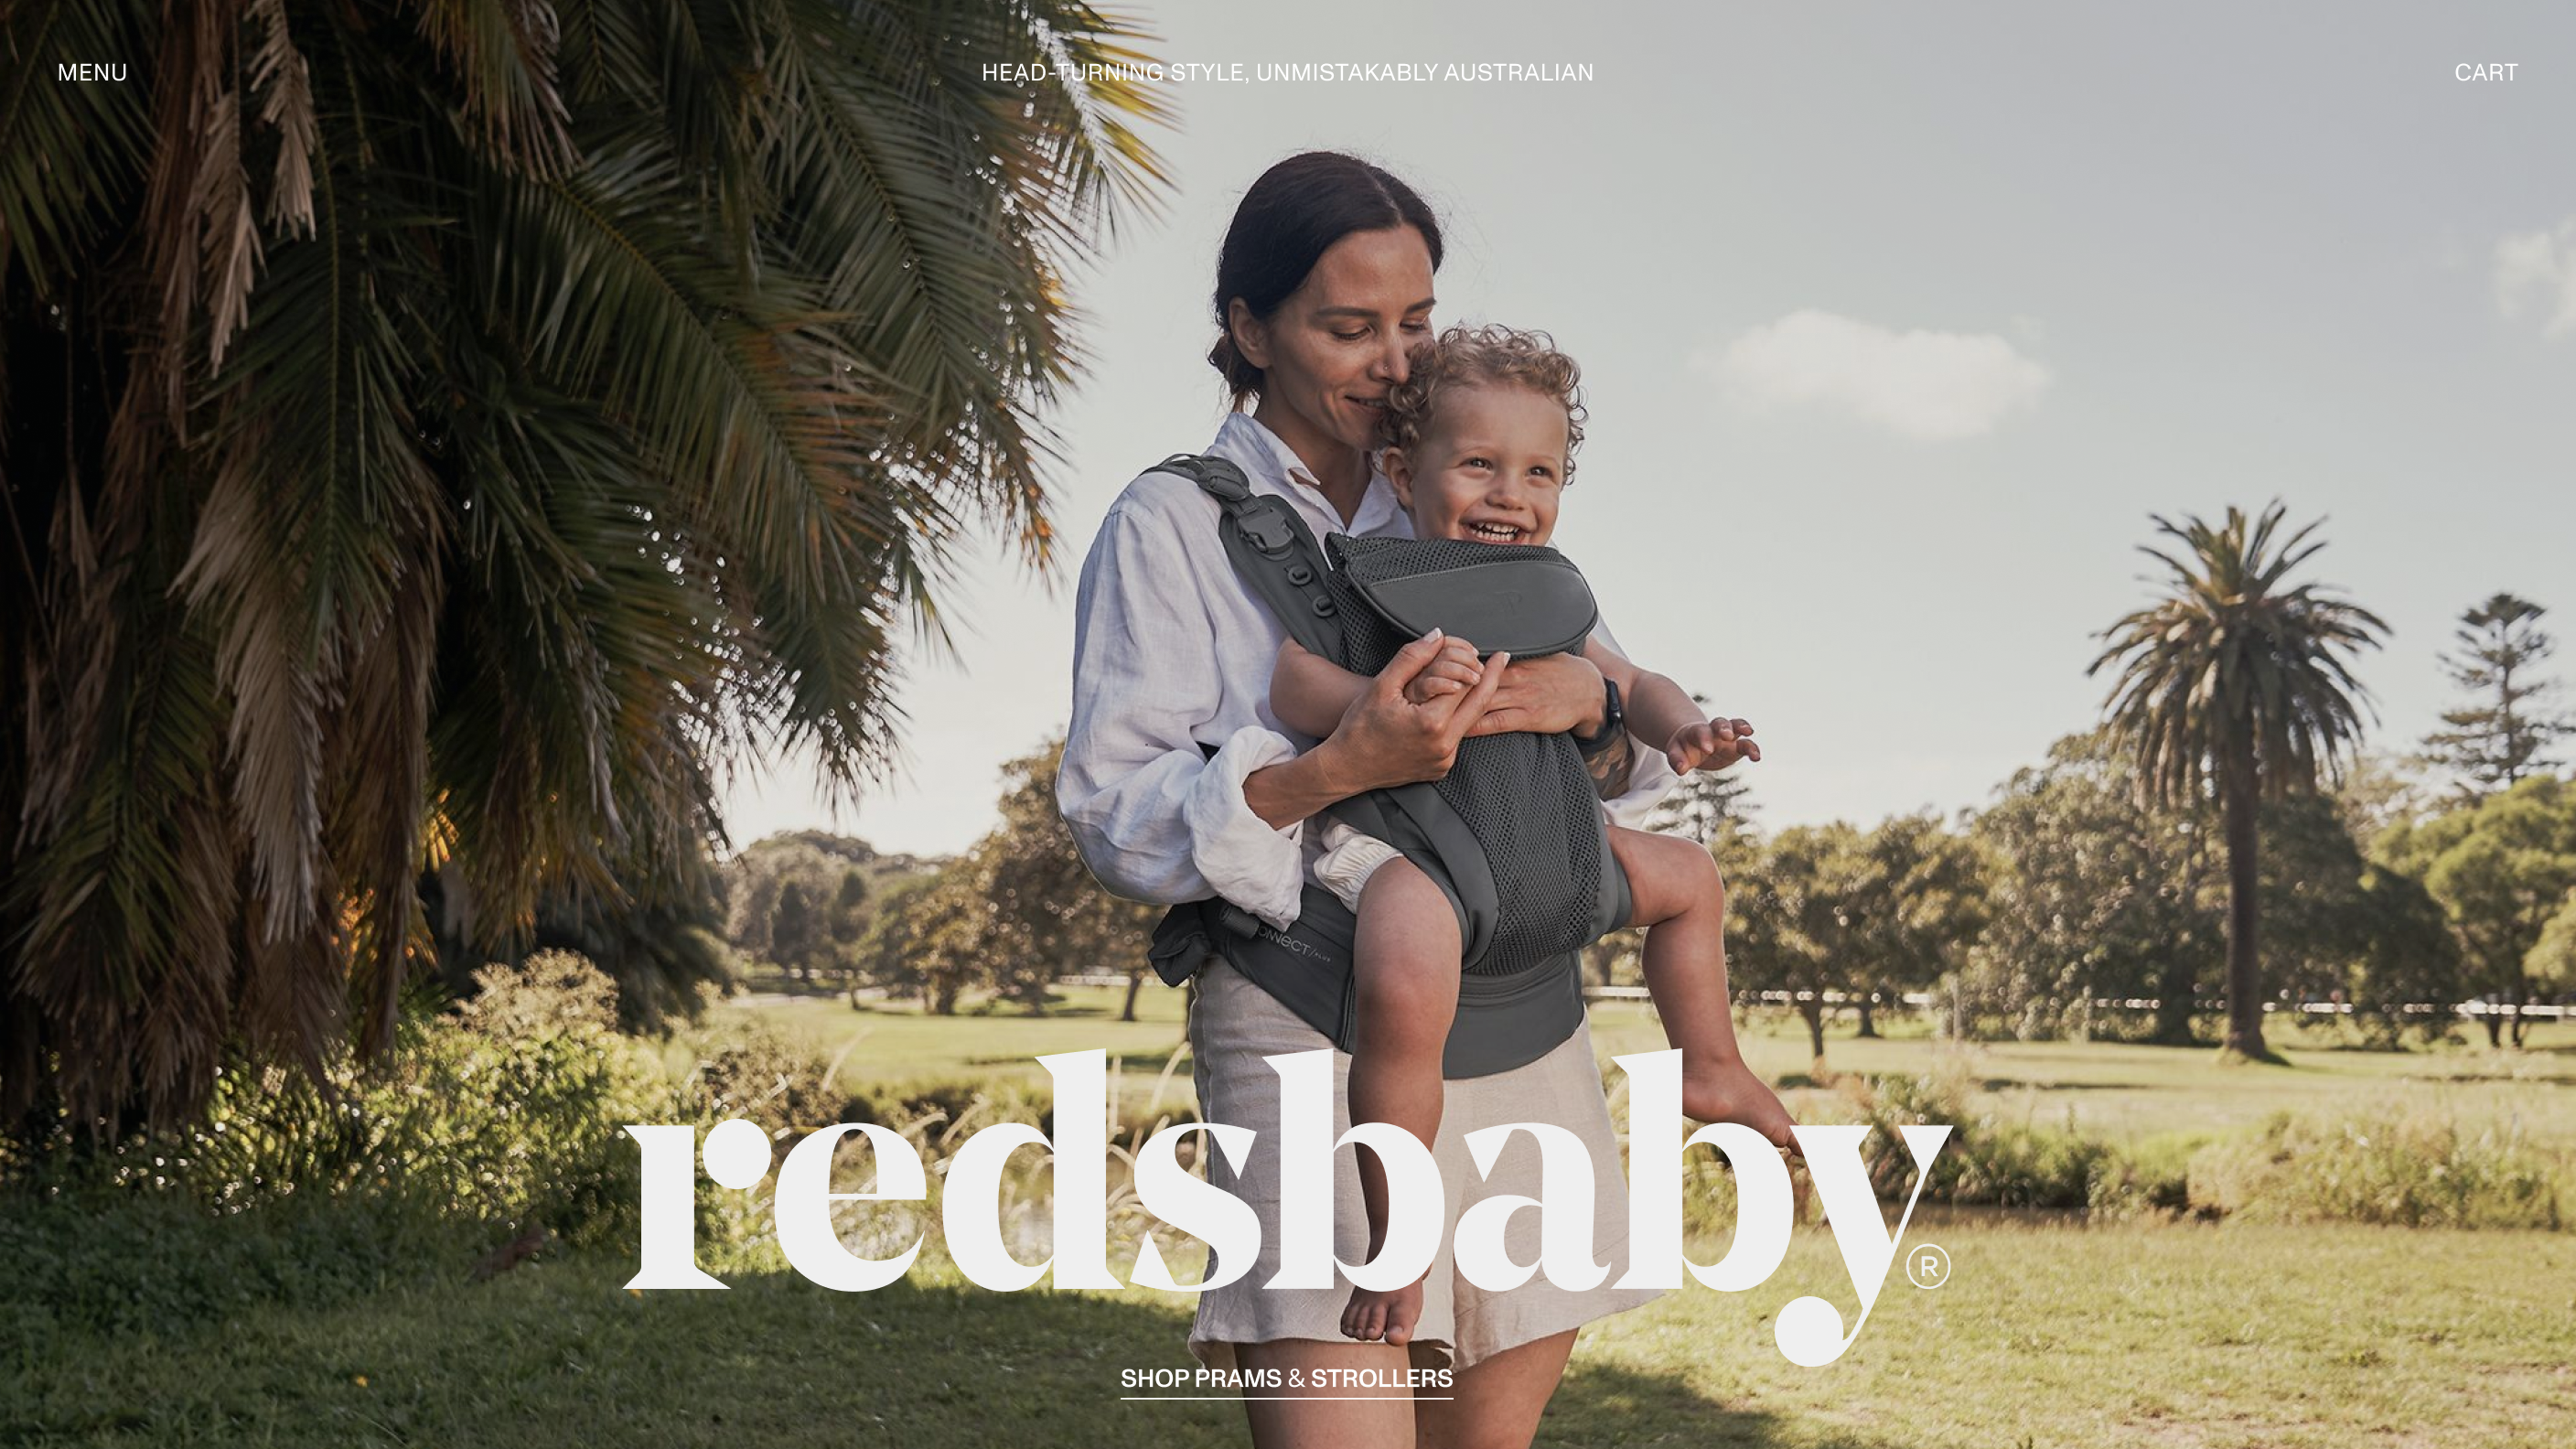 Redsbaby desktop homepage landing, a large image with a mother and her child in a Redsbaby carrier